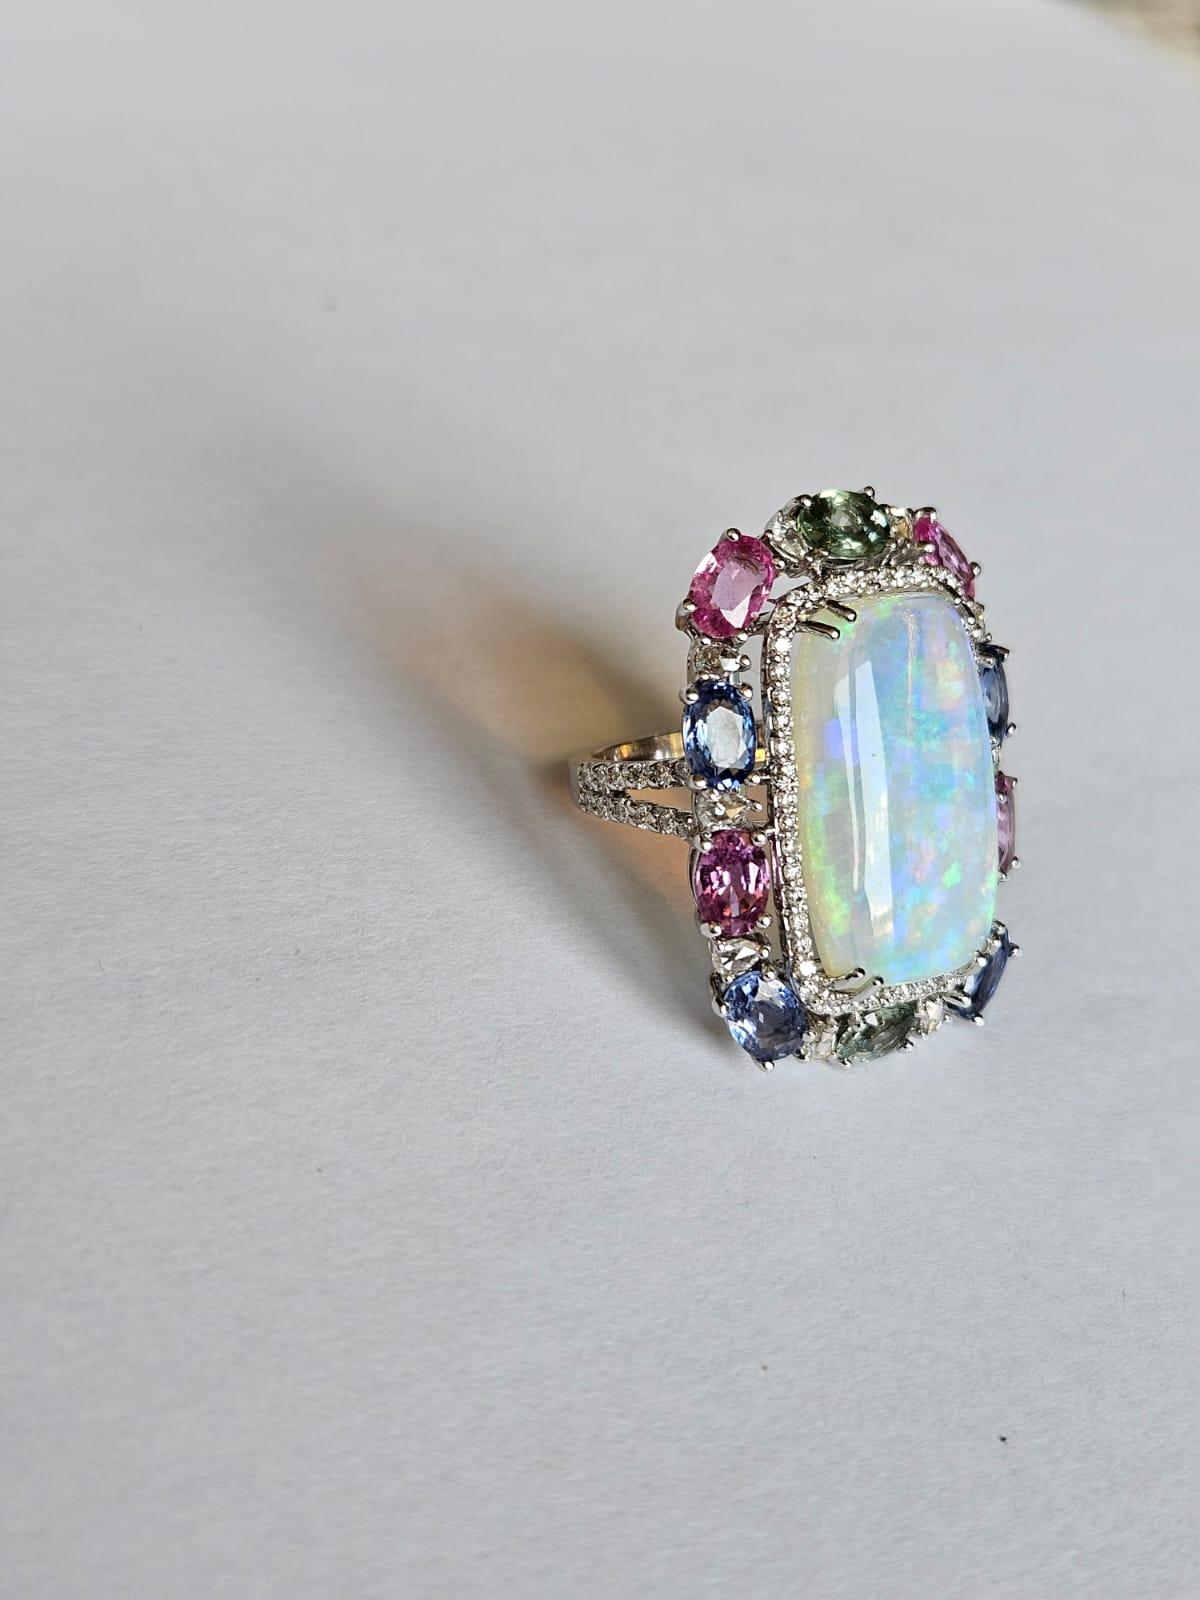 Oval Cut  18K Gold, 8.92 carats, Ethiopian Opal, Multi Sapphires & Diamonds Cocktail Ring